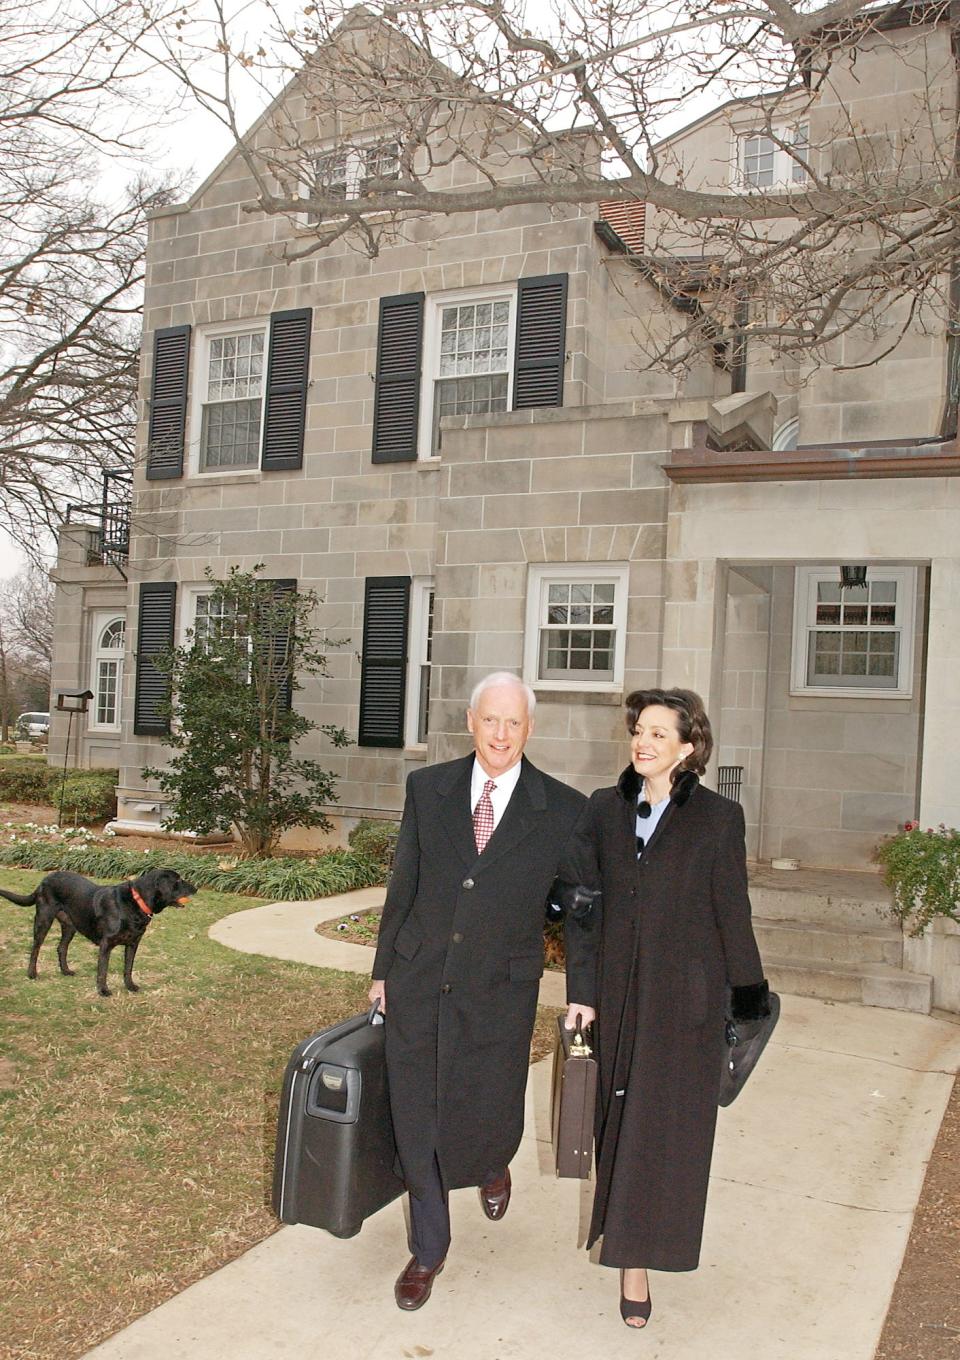 Gov. Frank Keating and former first lady Cathy Keating leave the Governor's Mansion for the last time in January 2003 after eight years. The Keatings launched a major renovation of the mansion, with private money and raised the funds to complete the Oklahoma Capitol with a dome.